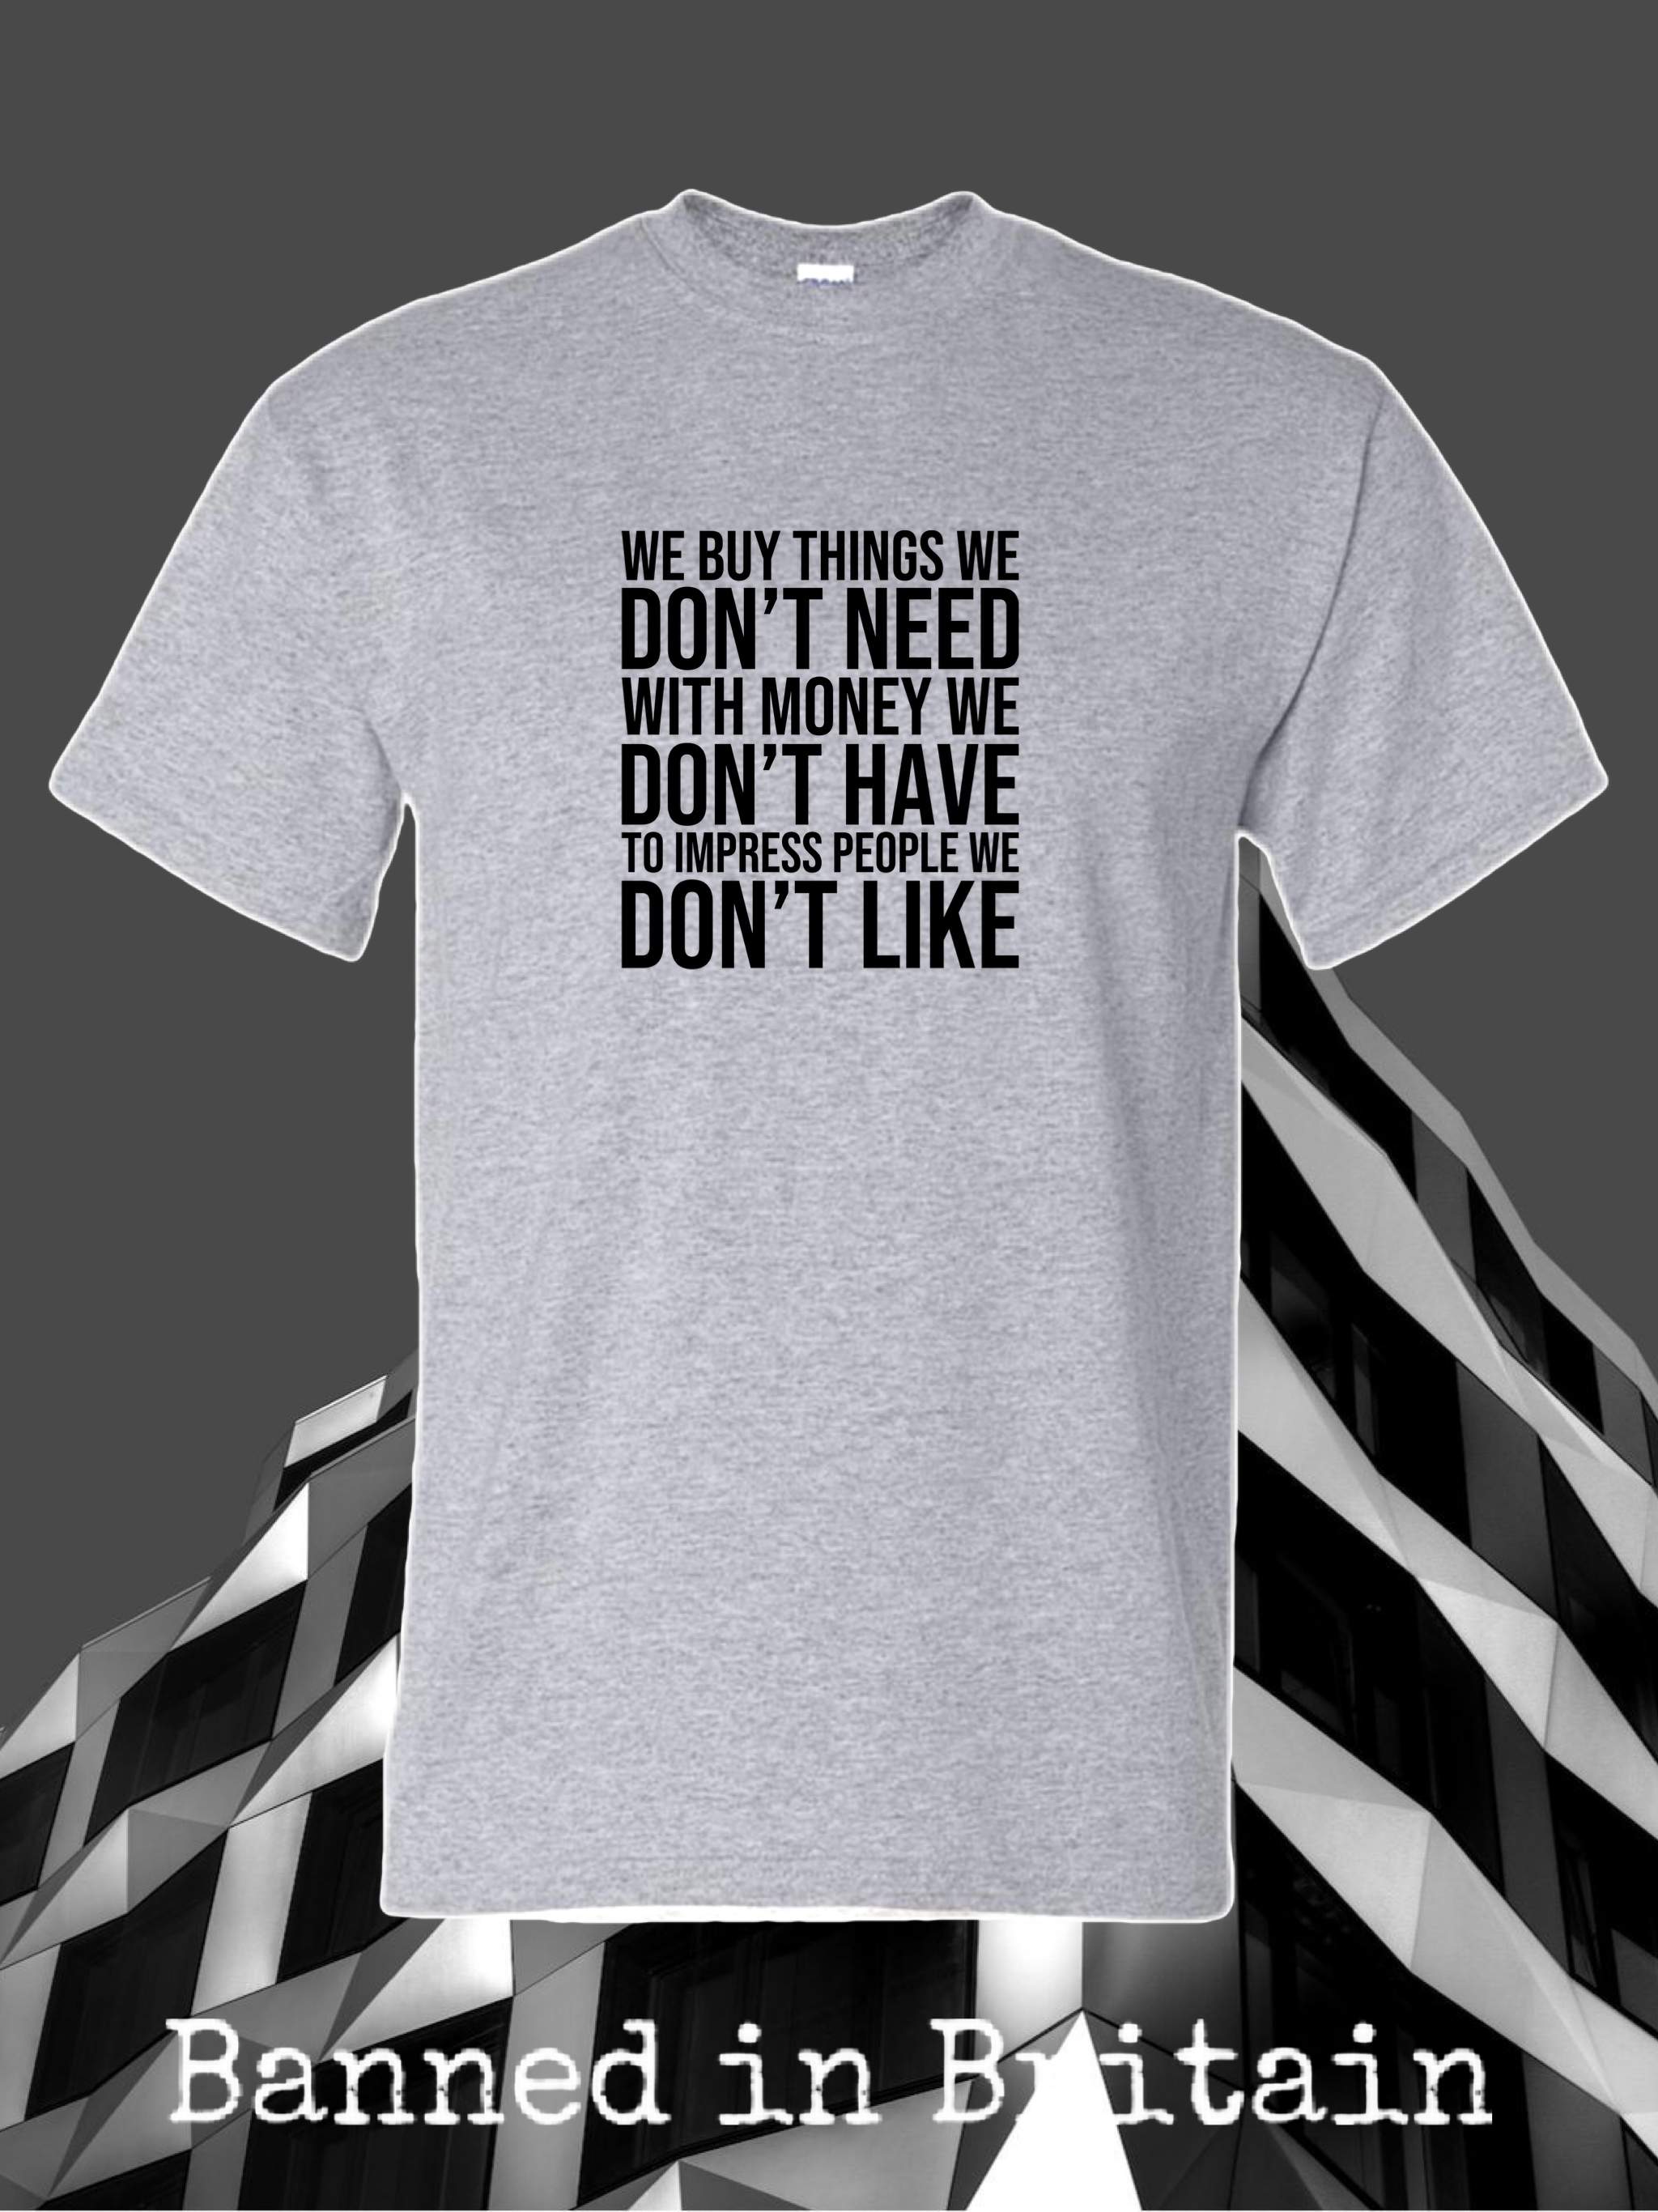 We Buy Things We Don't Need T-shirt